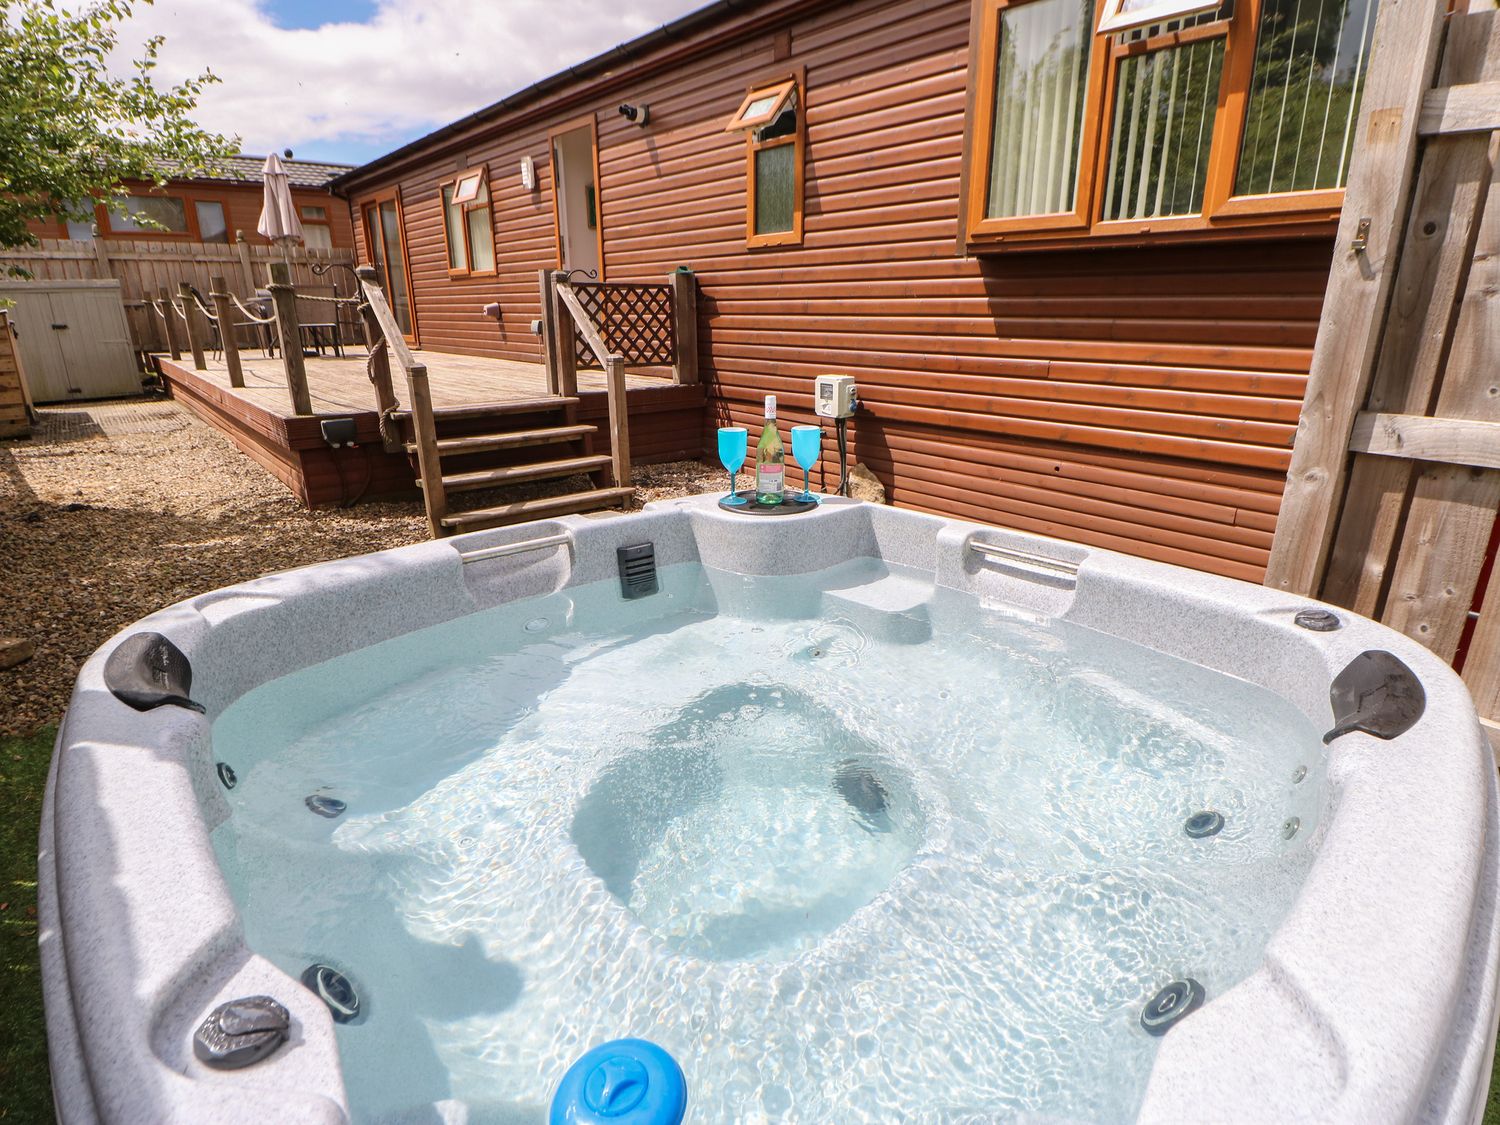 Butterfly Lodge, North Yorkshire. Two-bedroom lodge with hot tub and pet-friendly garden.